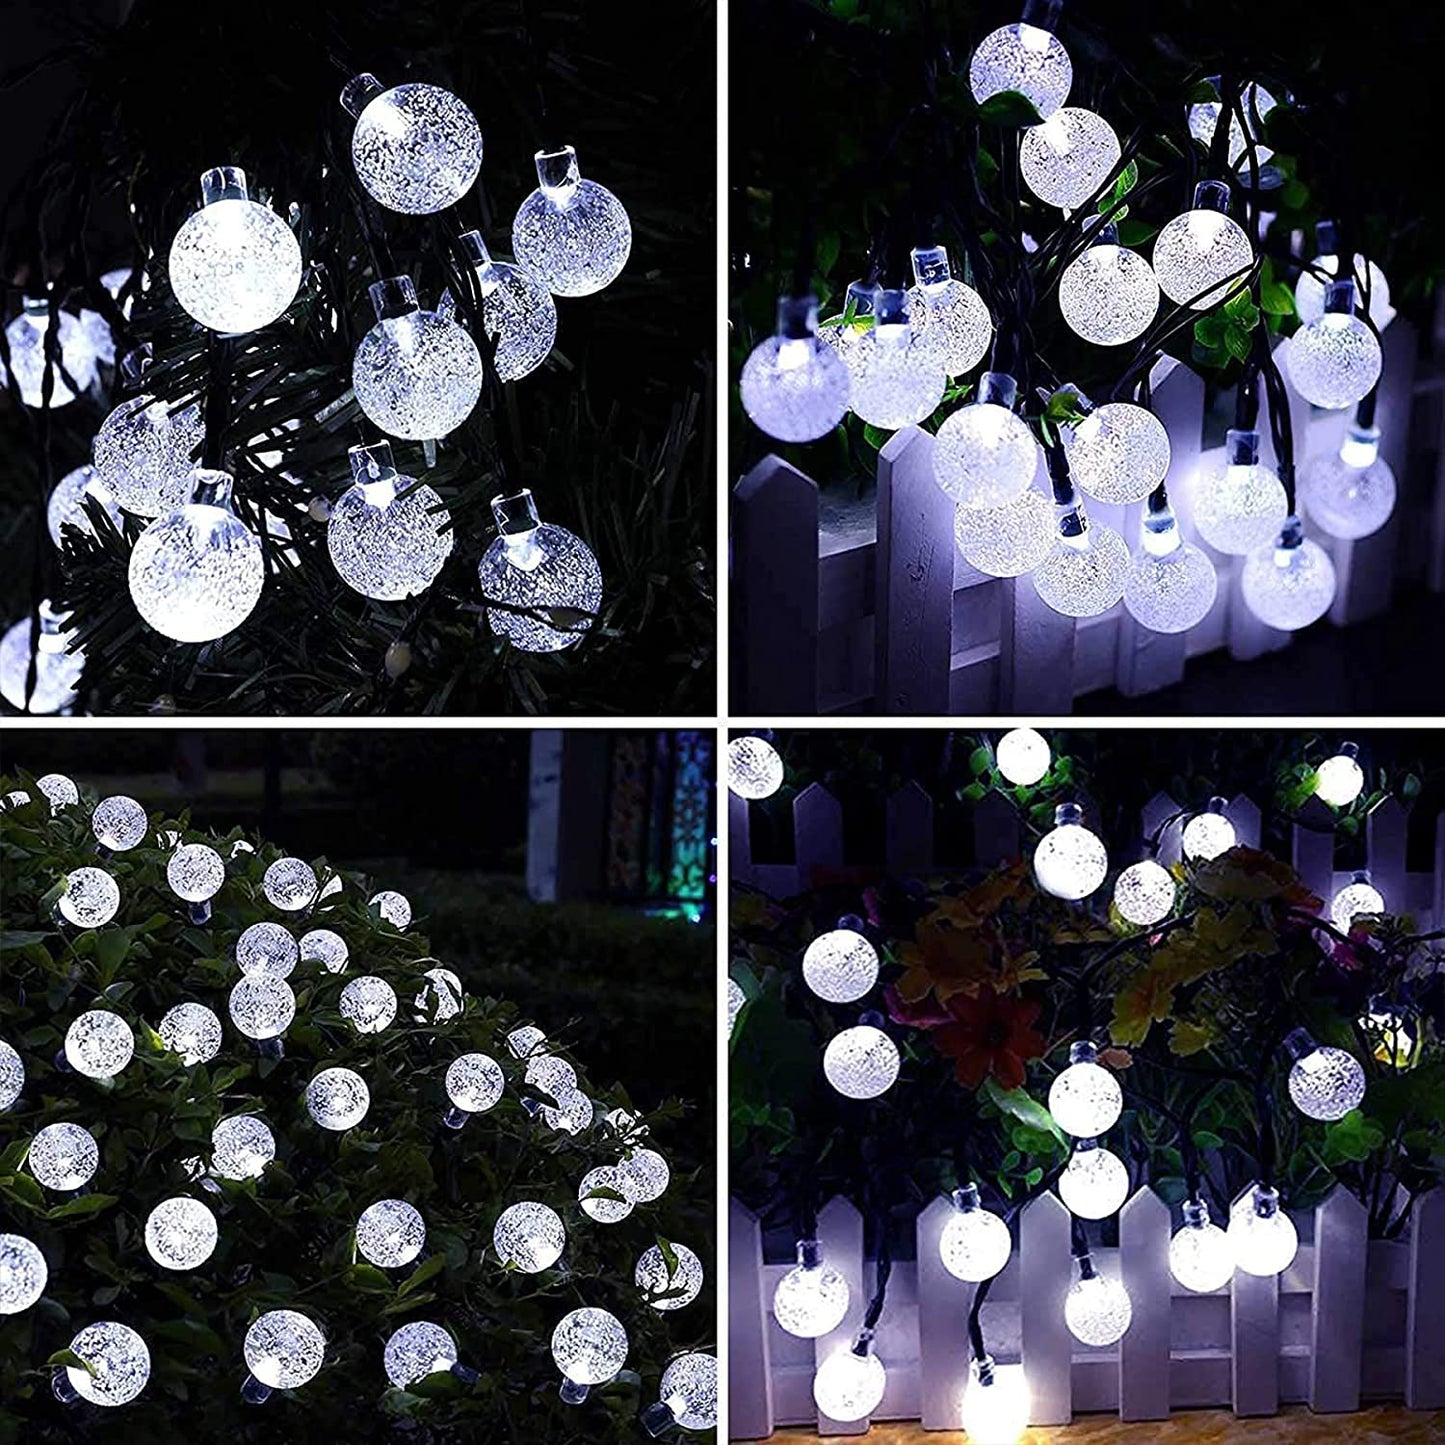 Solar Lights Outdoor Garden, 5M 30LED Solar Fairy Lights with 8 Modes Solar String Lights Waterproof for Outdoor/Indoor, Home, ,Wedding, Party, Festival, Christmas Decorations(Cool White)